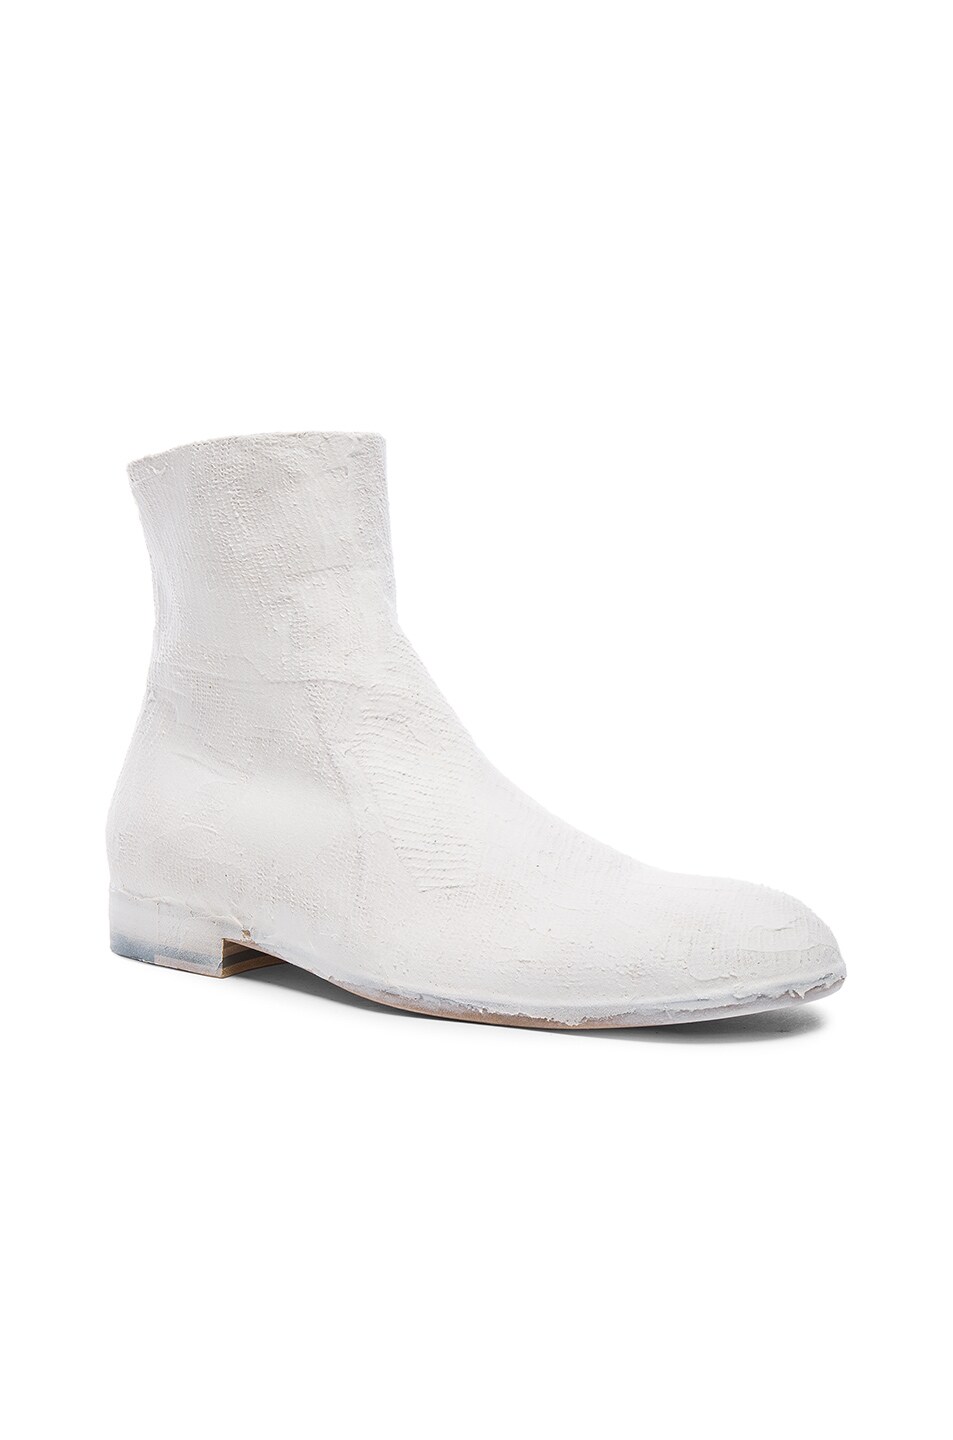 Image 1 of Maison Margiela Handmade Chalk Effect Suede Boots in Chalk